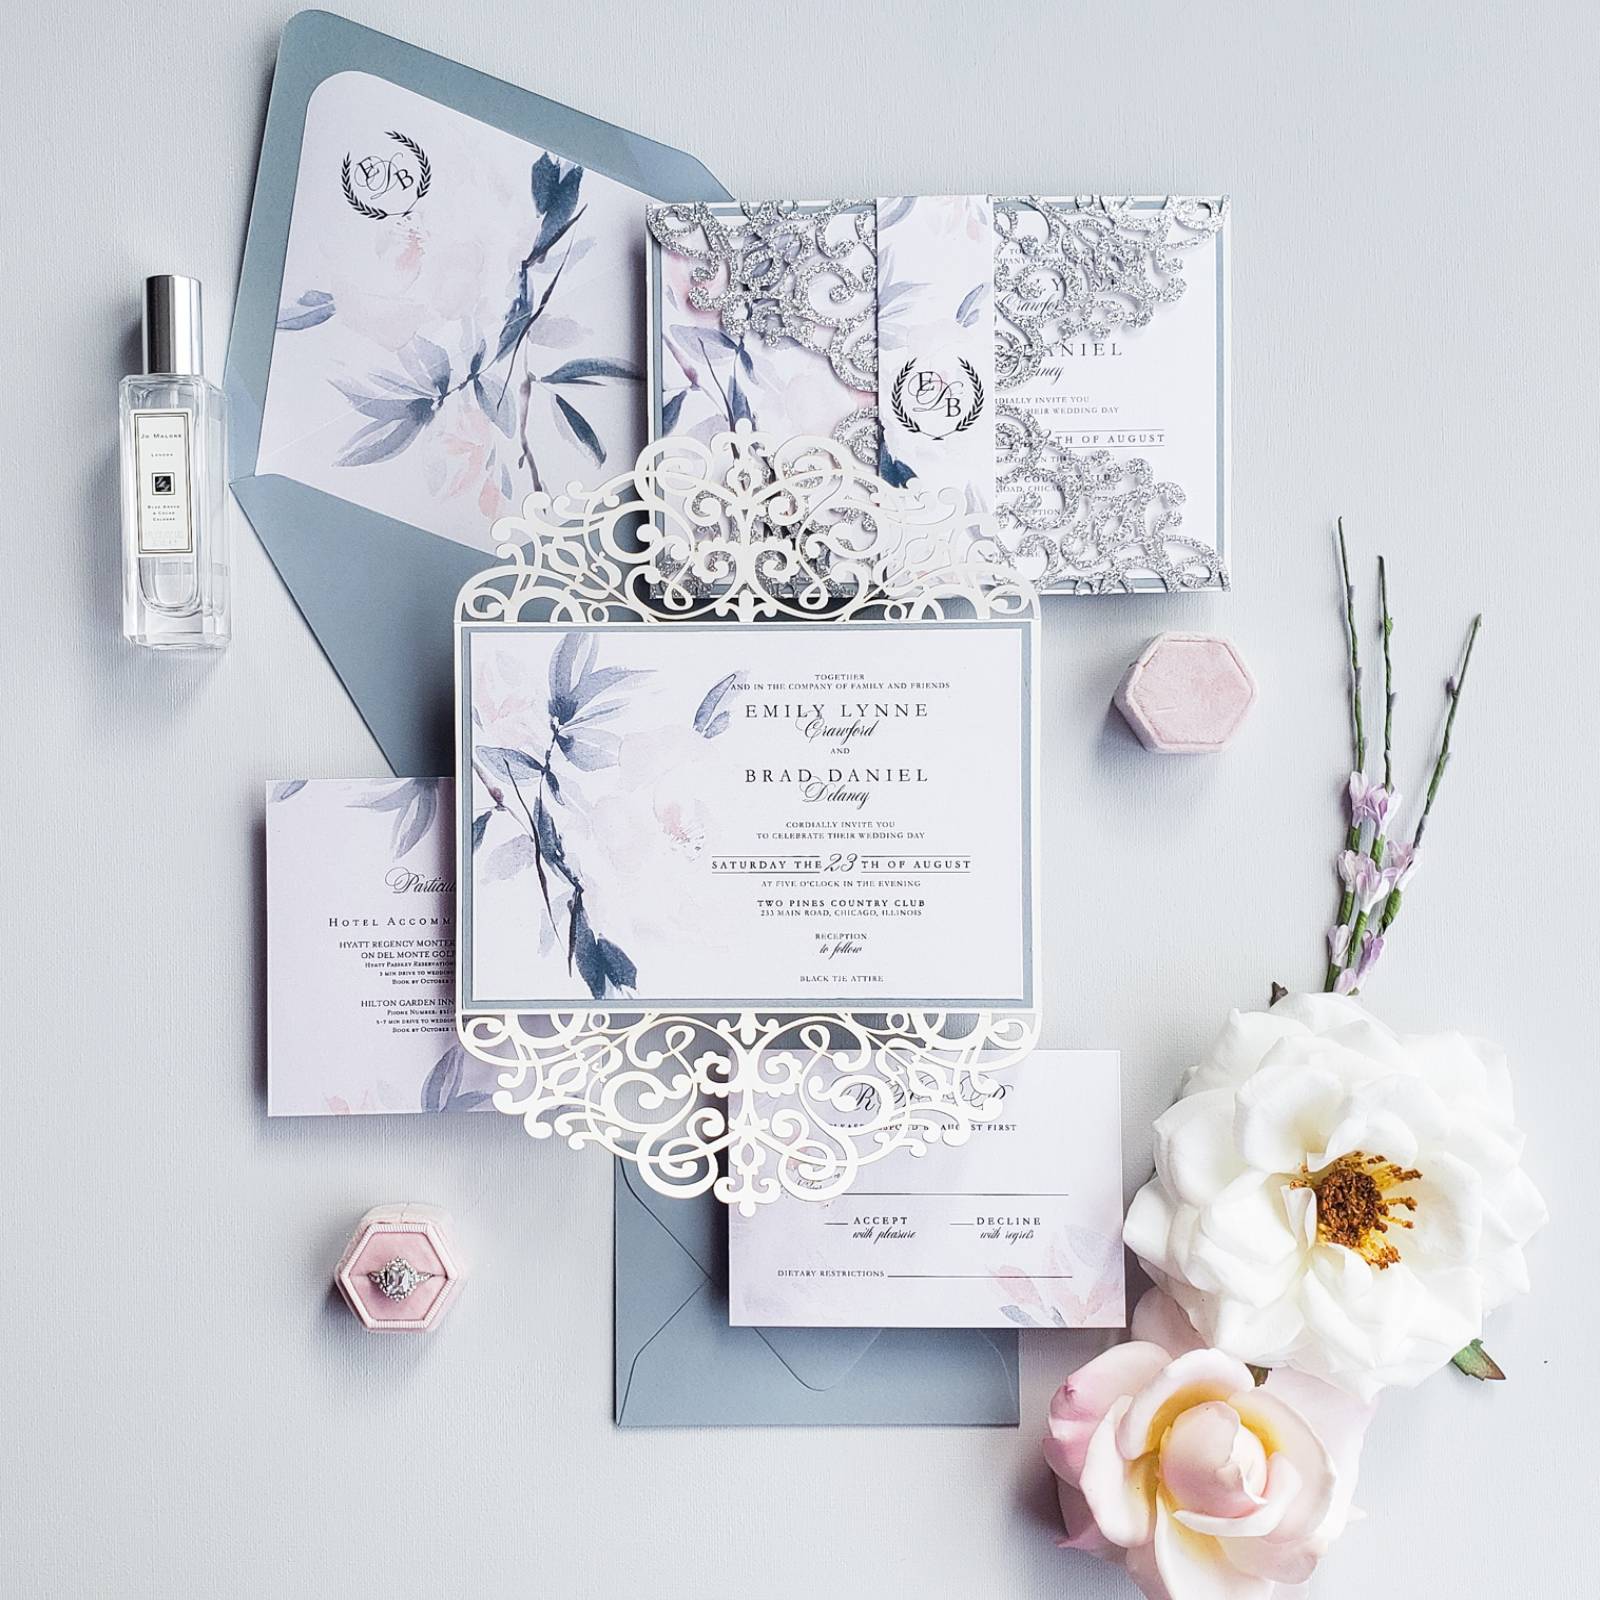 [vc_row][vc_column][vc_column_text]Purchase this listing to get a sample of our Helsinki wedding invitation suite.

The sample includes:

• 5